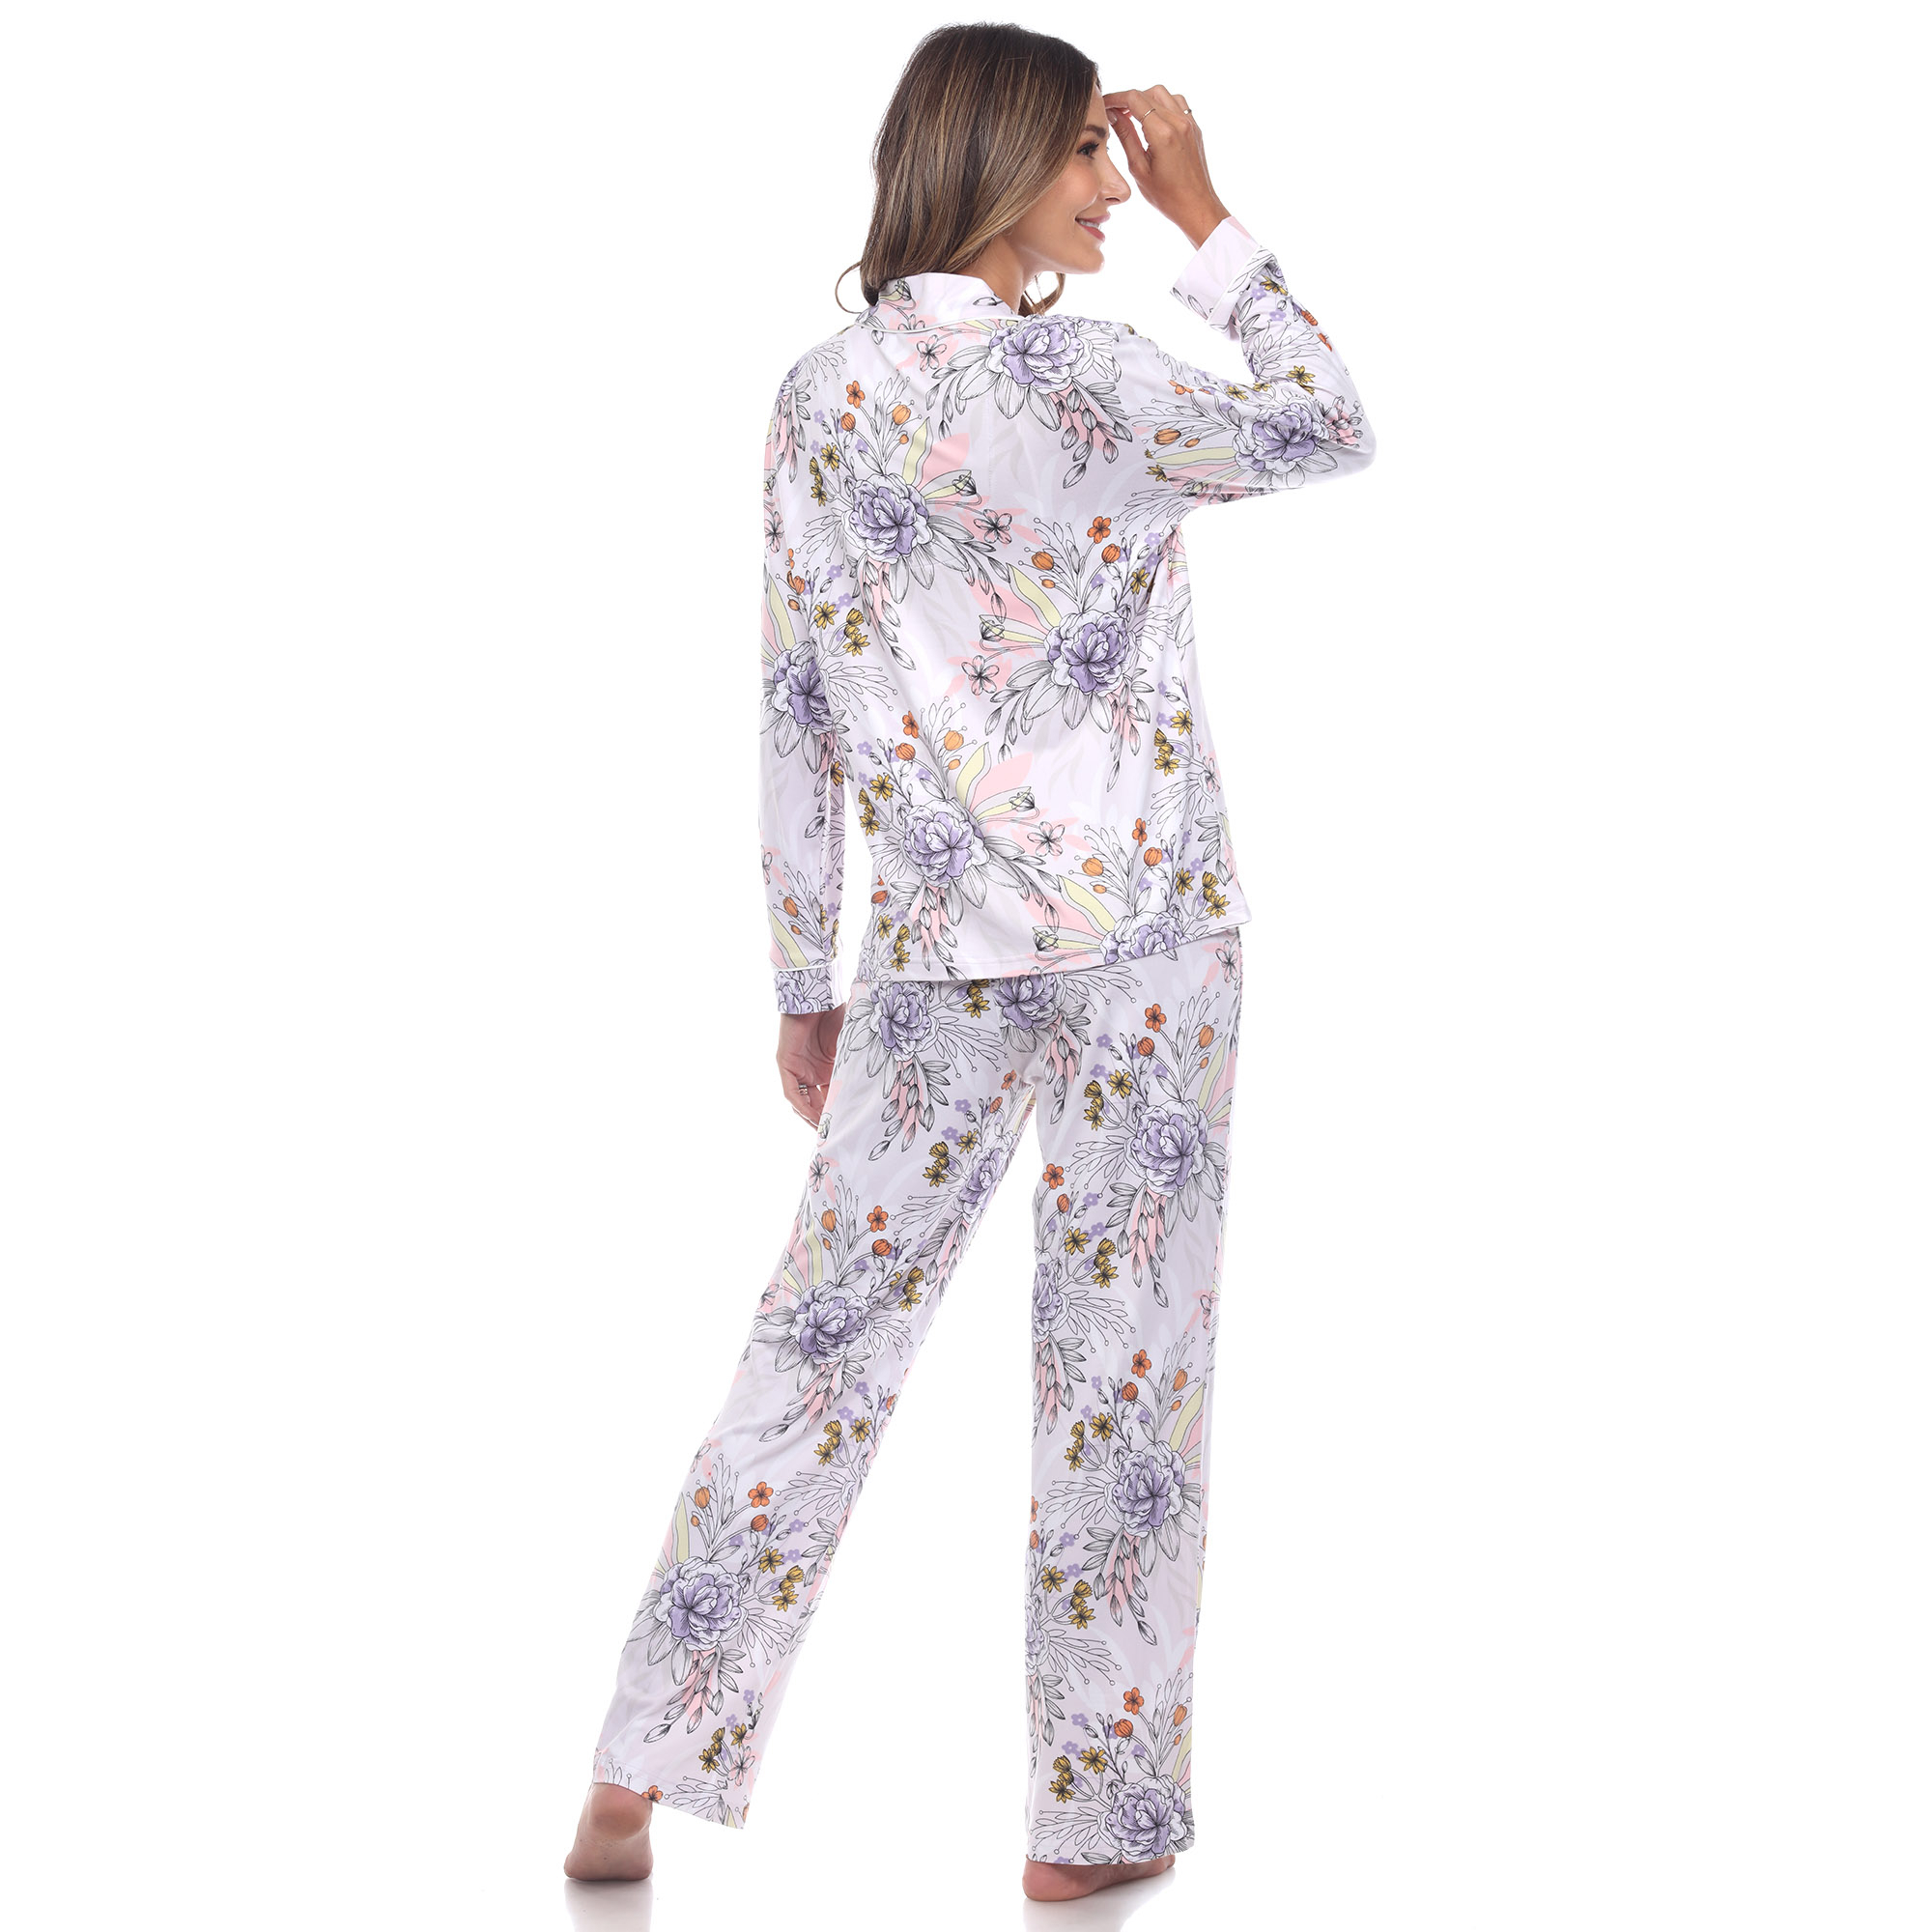 White Mark Women's Long Sleeve Floral Pajama Set - Red, X-Large